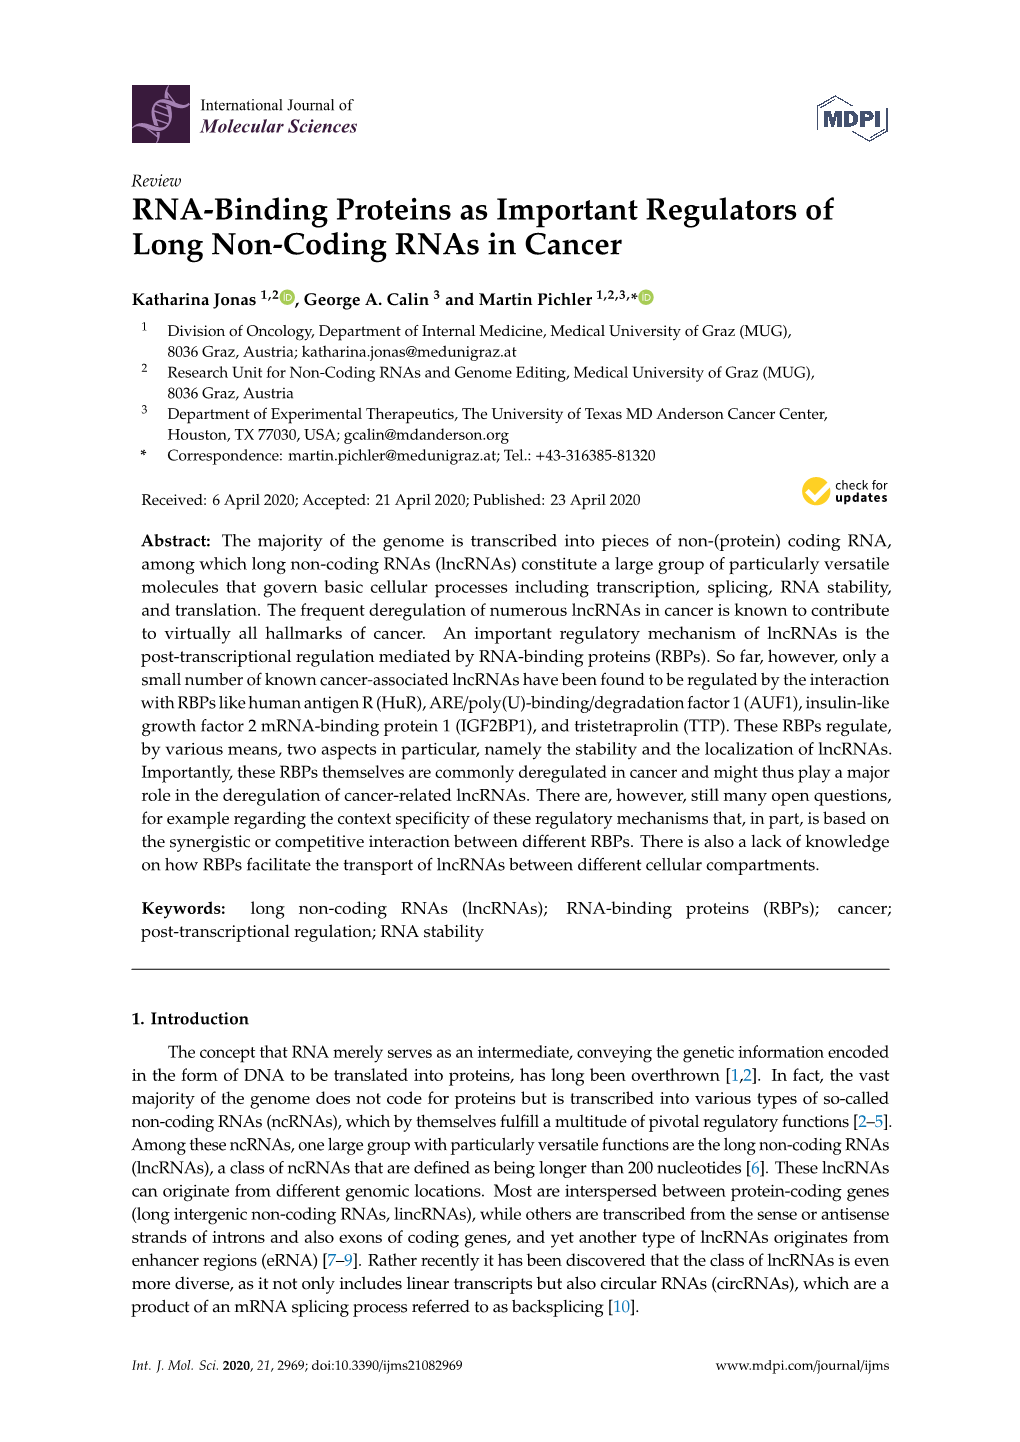 RNA-Binding Proteins As Important Regulators of Long Non-Coding Rnas in Cancer